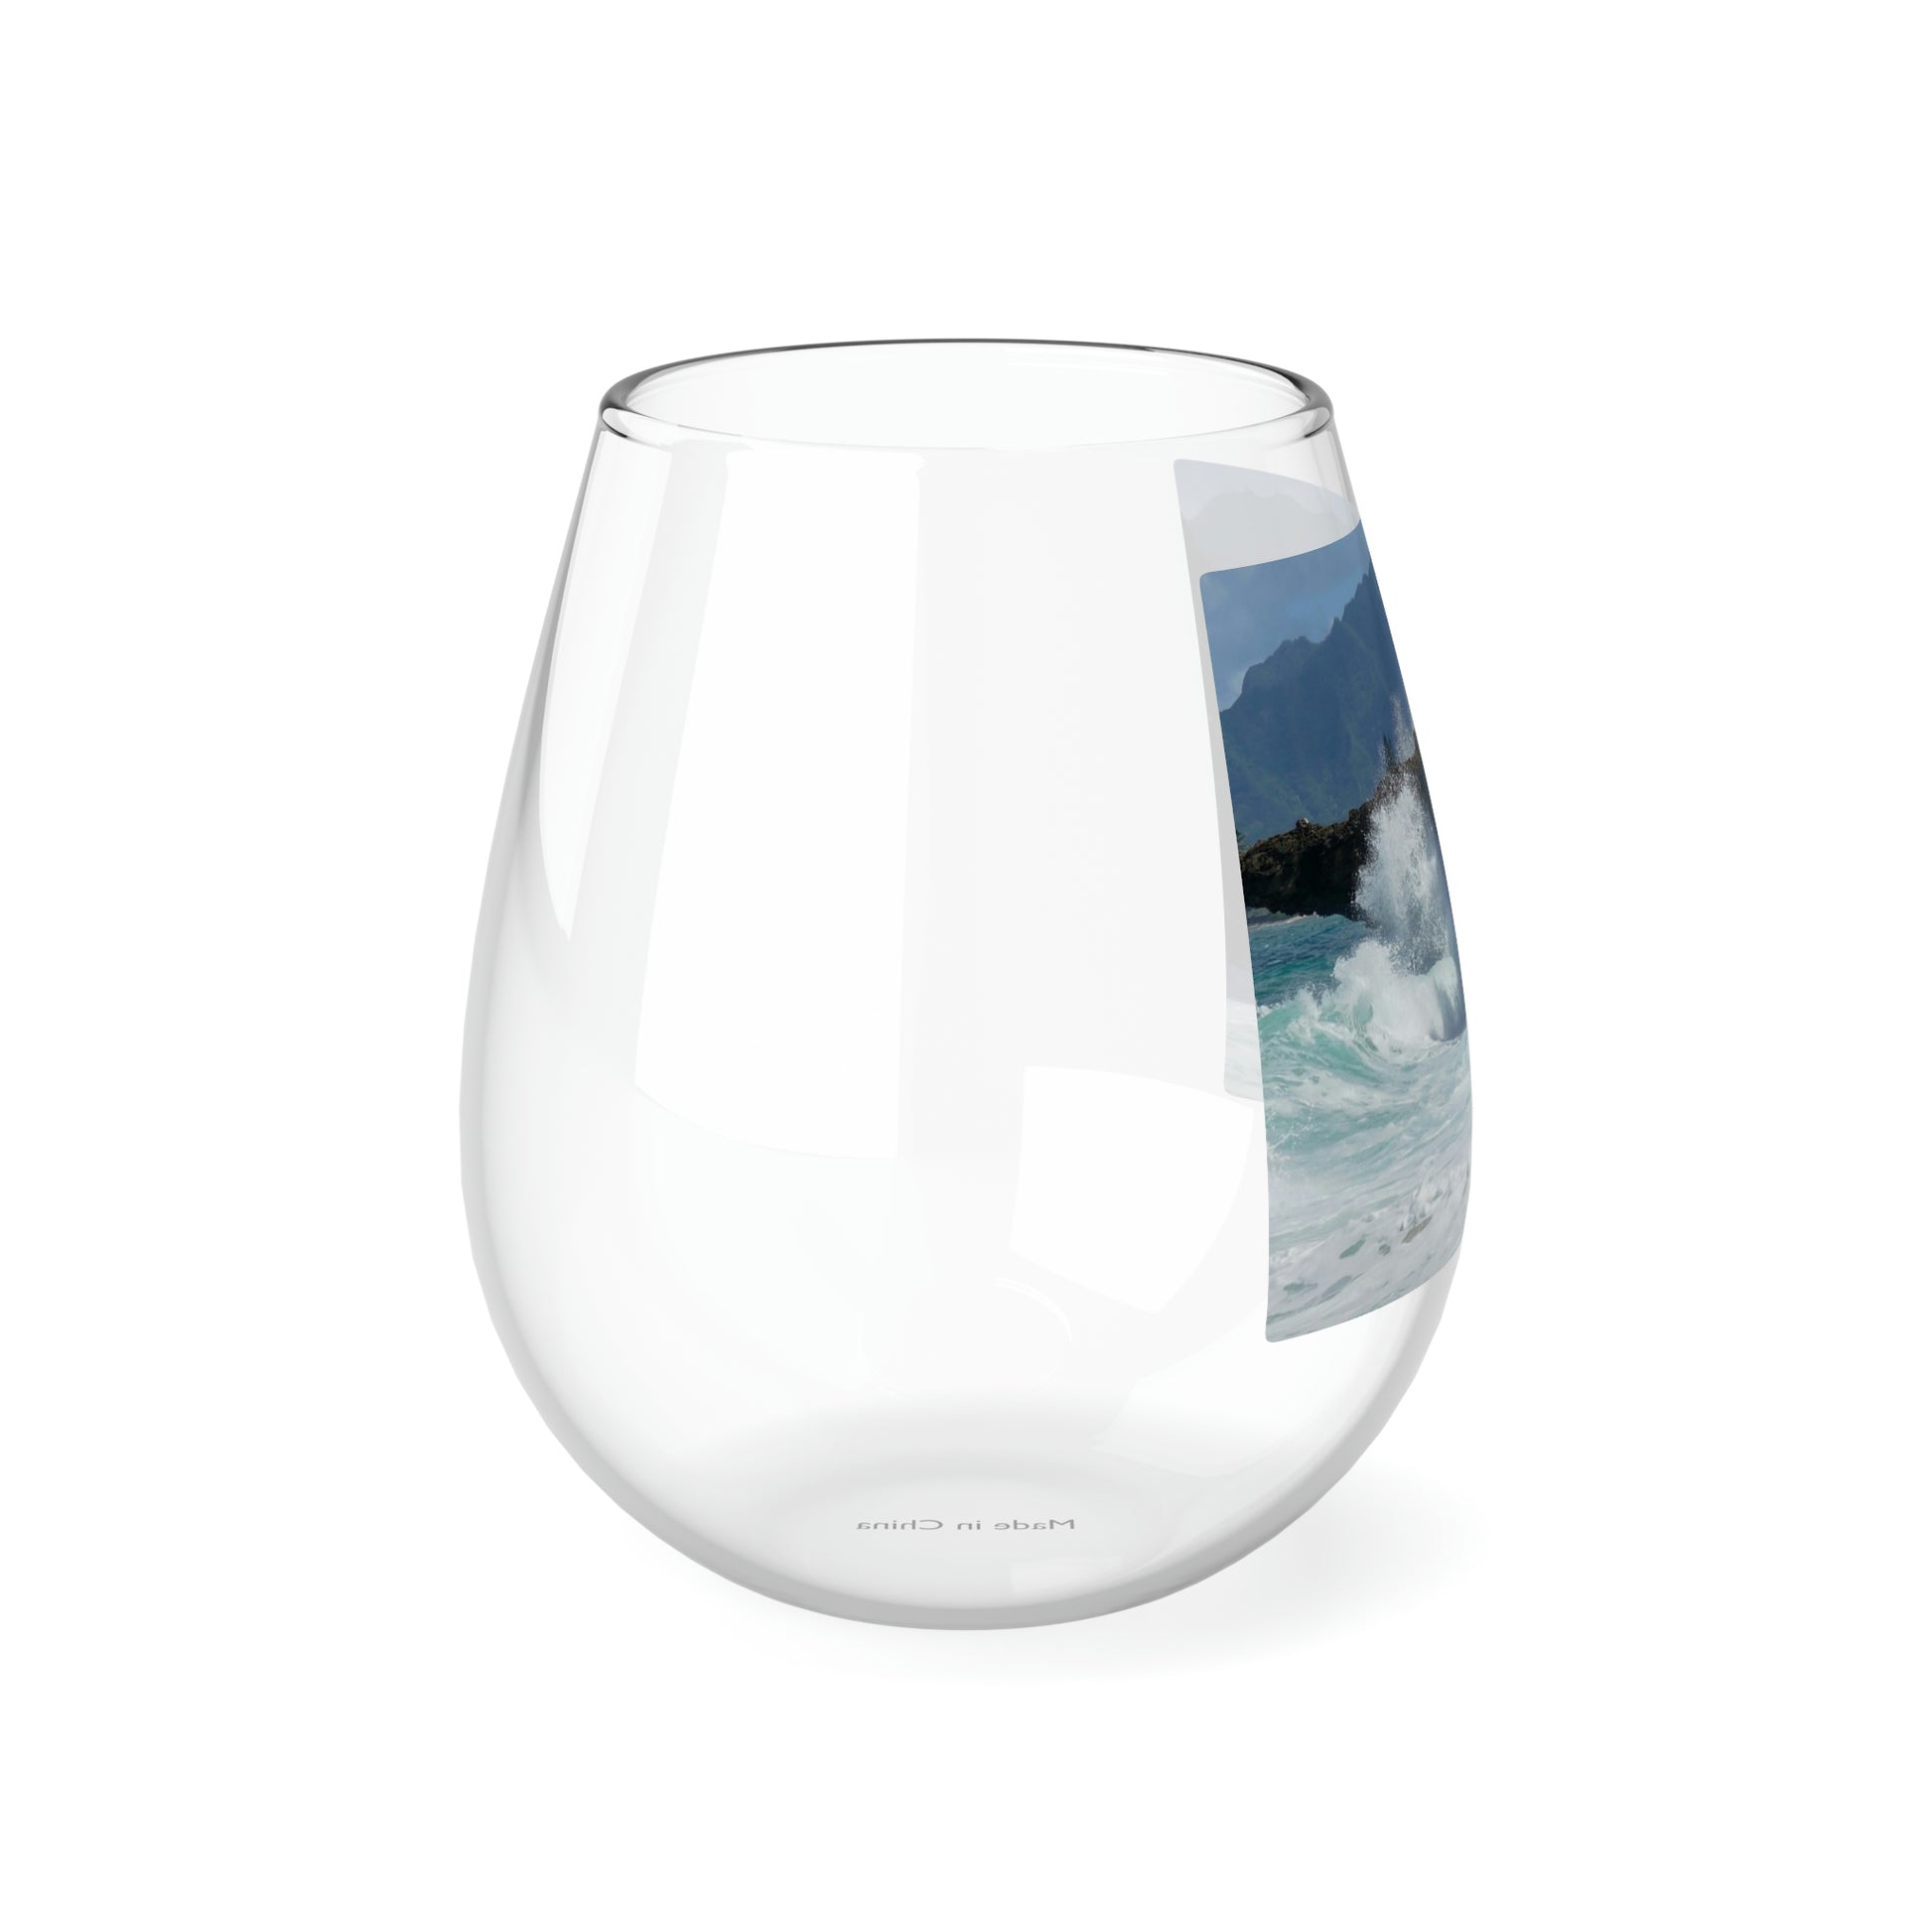 Rockin Surfer's Rope - Stemless Wine Glass, 11.75 oz - Fry1Productions